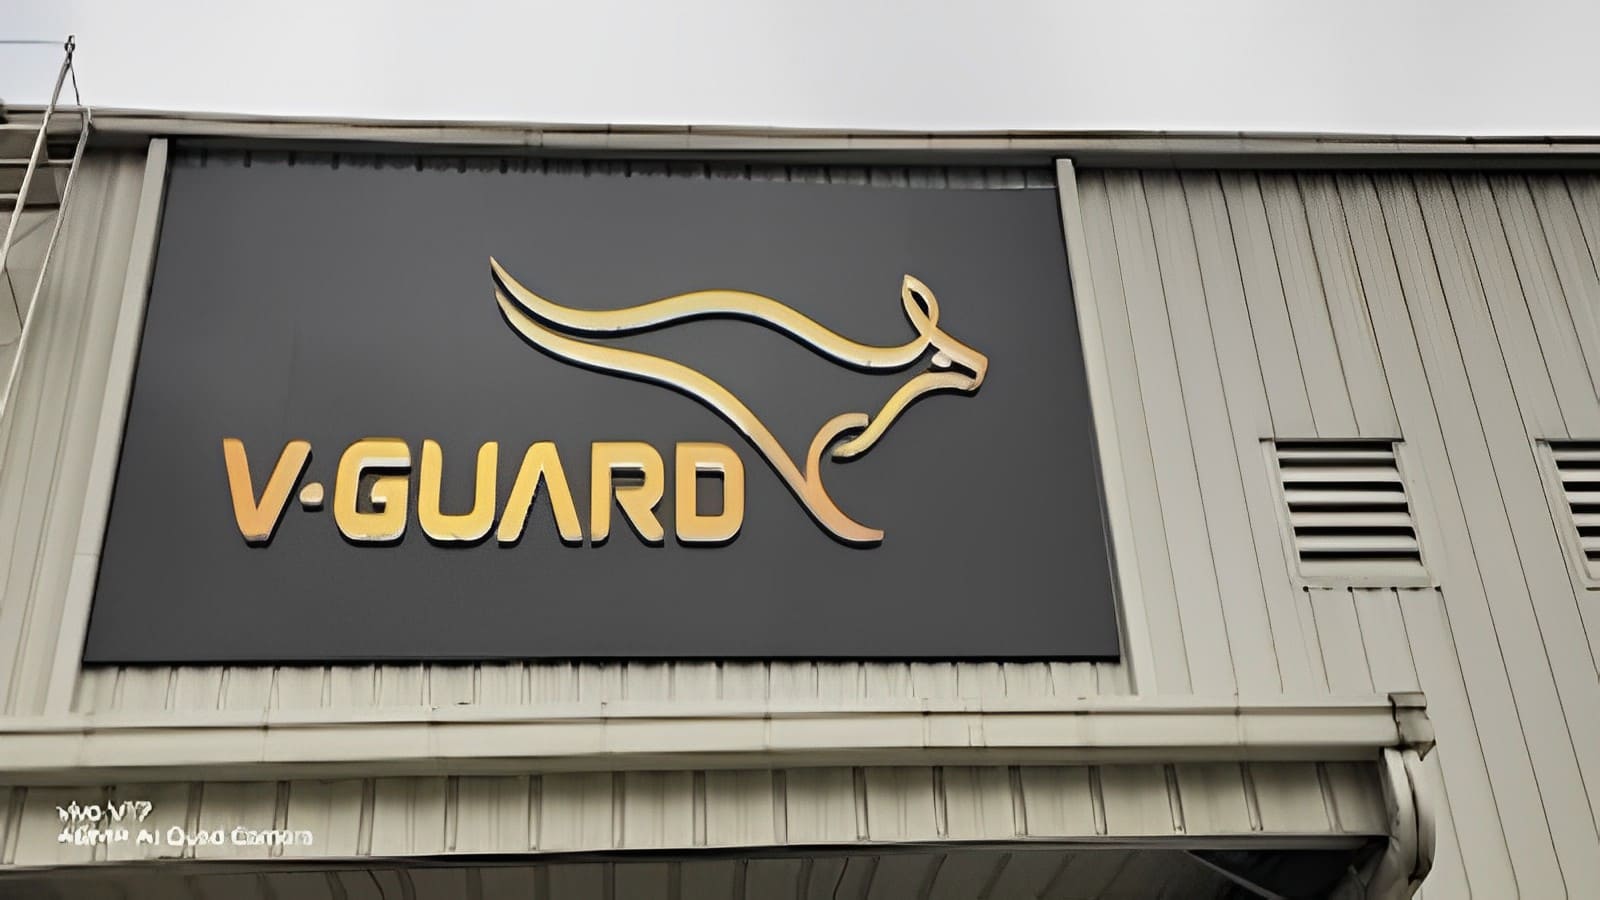 V Guard Q4FY23 Results Consolidated PAT of Rs 52.72 Cr